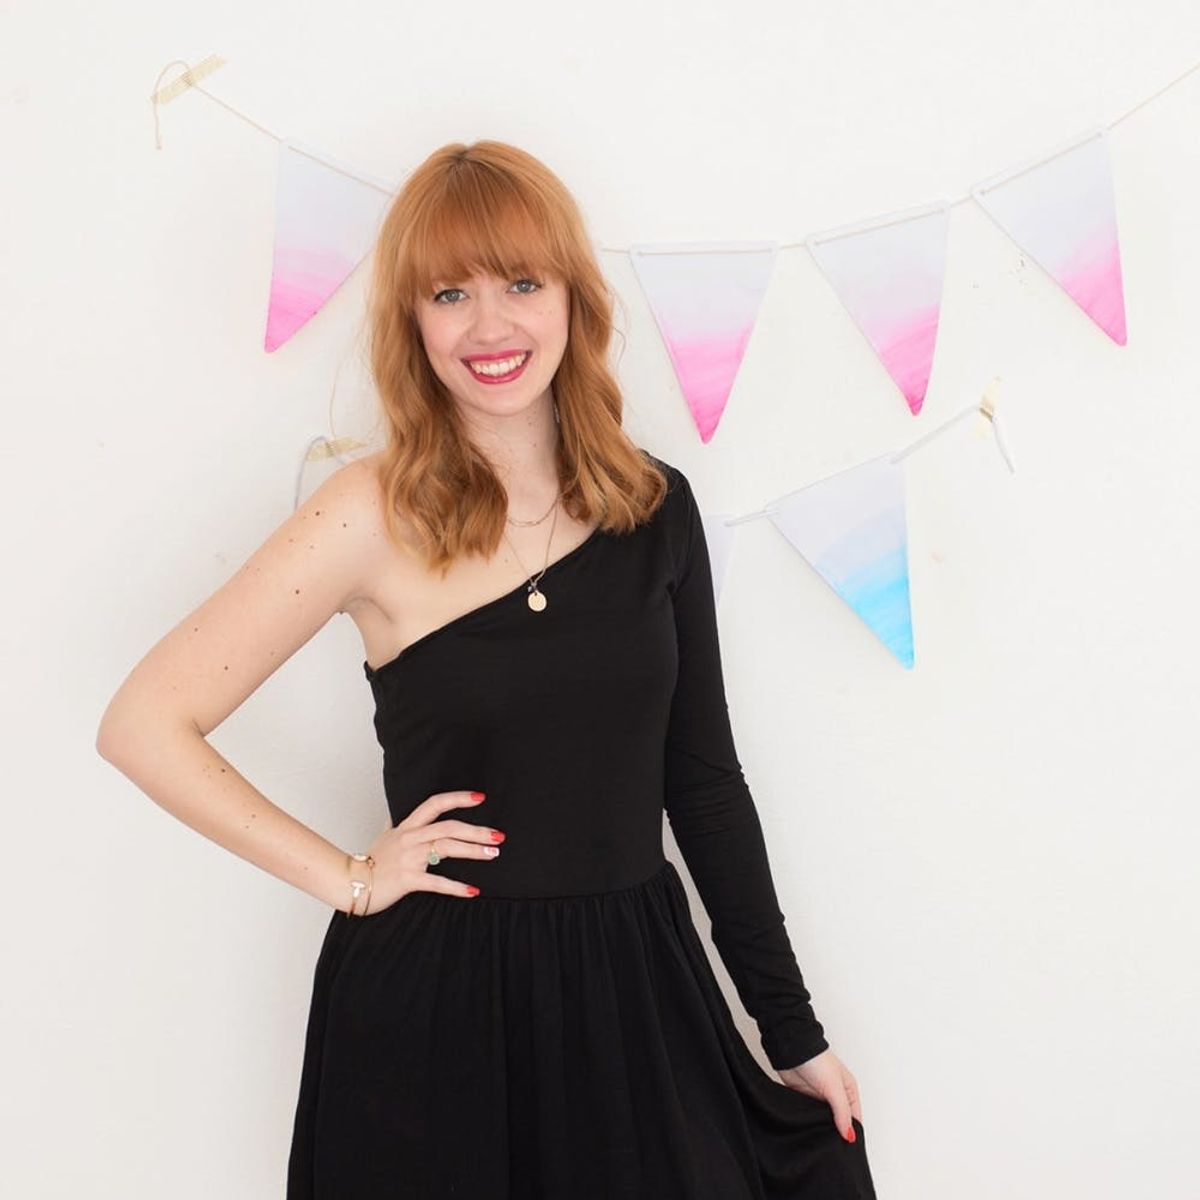 Follow These Easy Steps to DIY This Anthro-Inspired One-Shoulder Dress